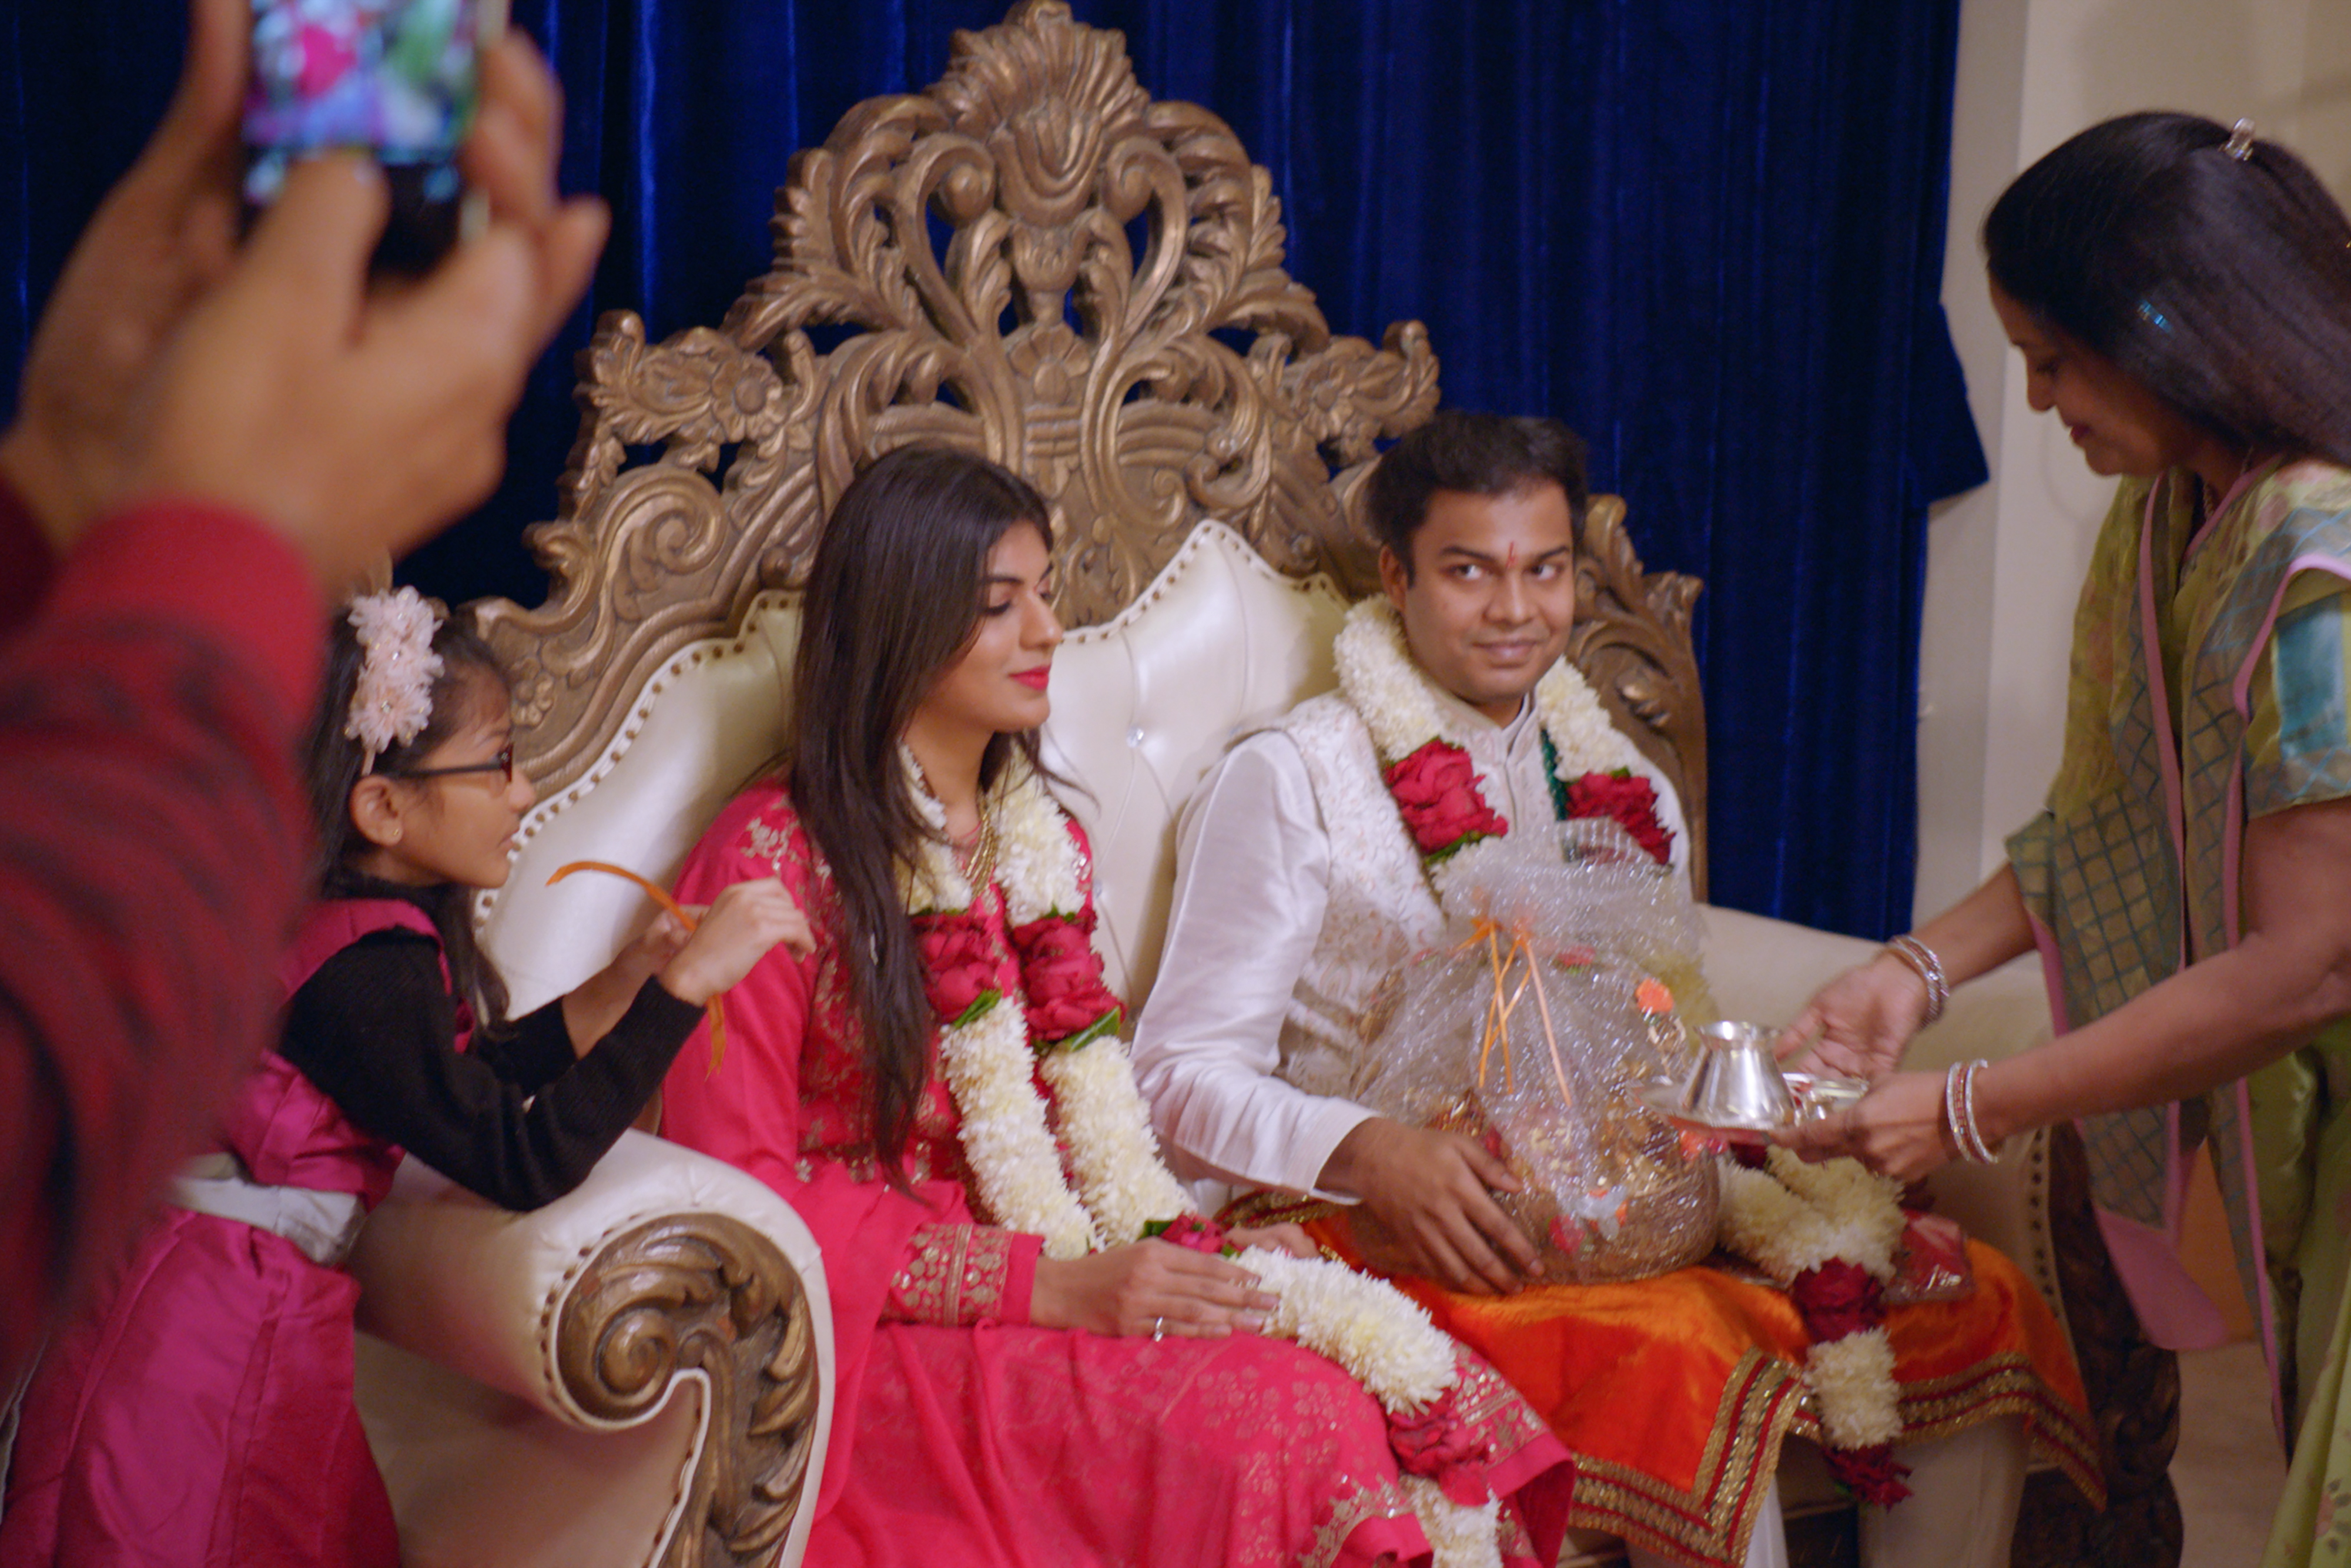 What Indian Matchmaking gets wrong about arranged marriages photo